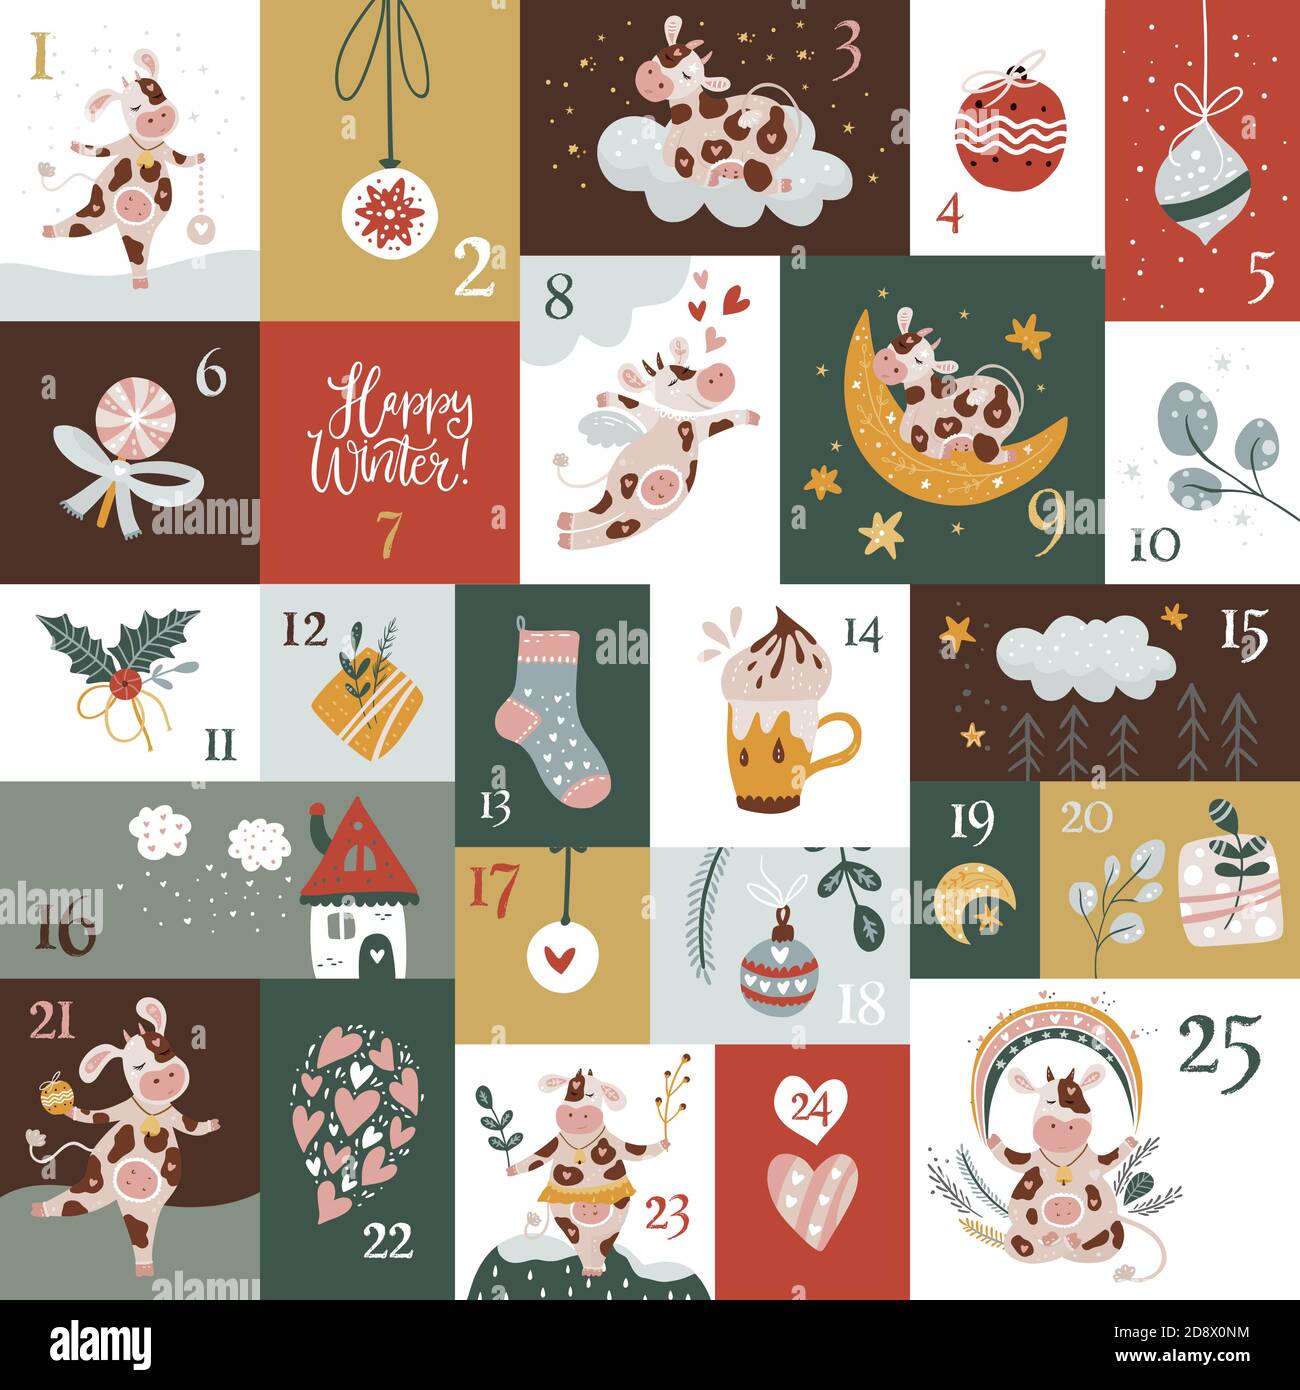 Cute cartoon advent calendar with funny cow animals and signs for 25